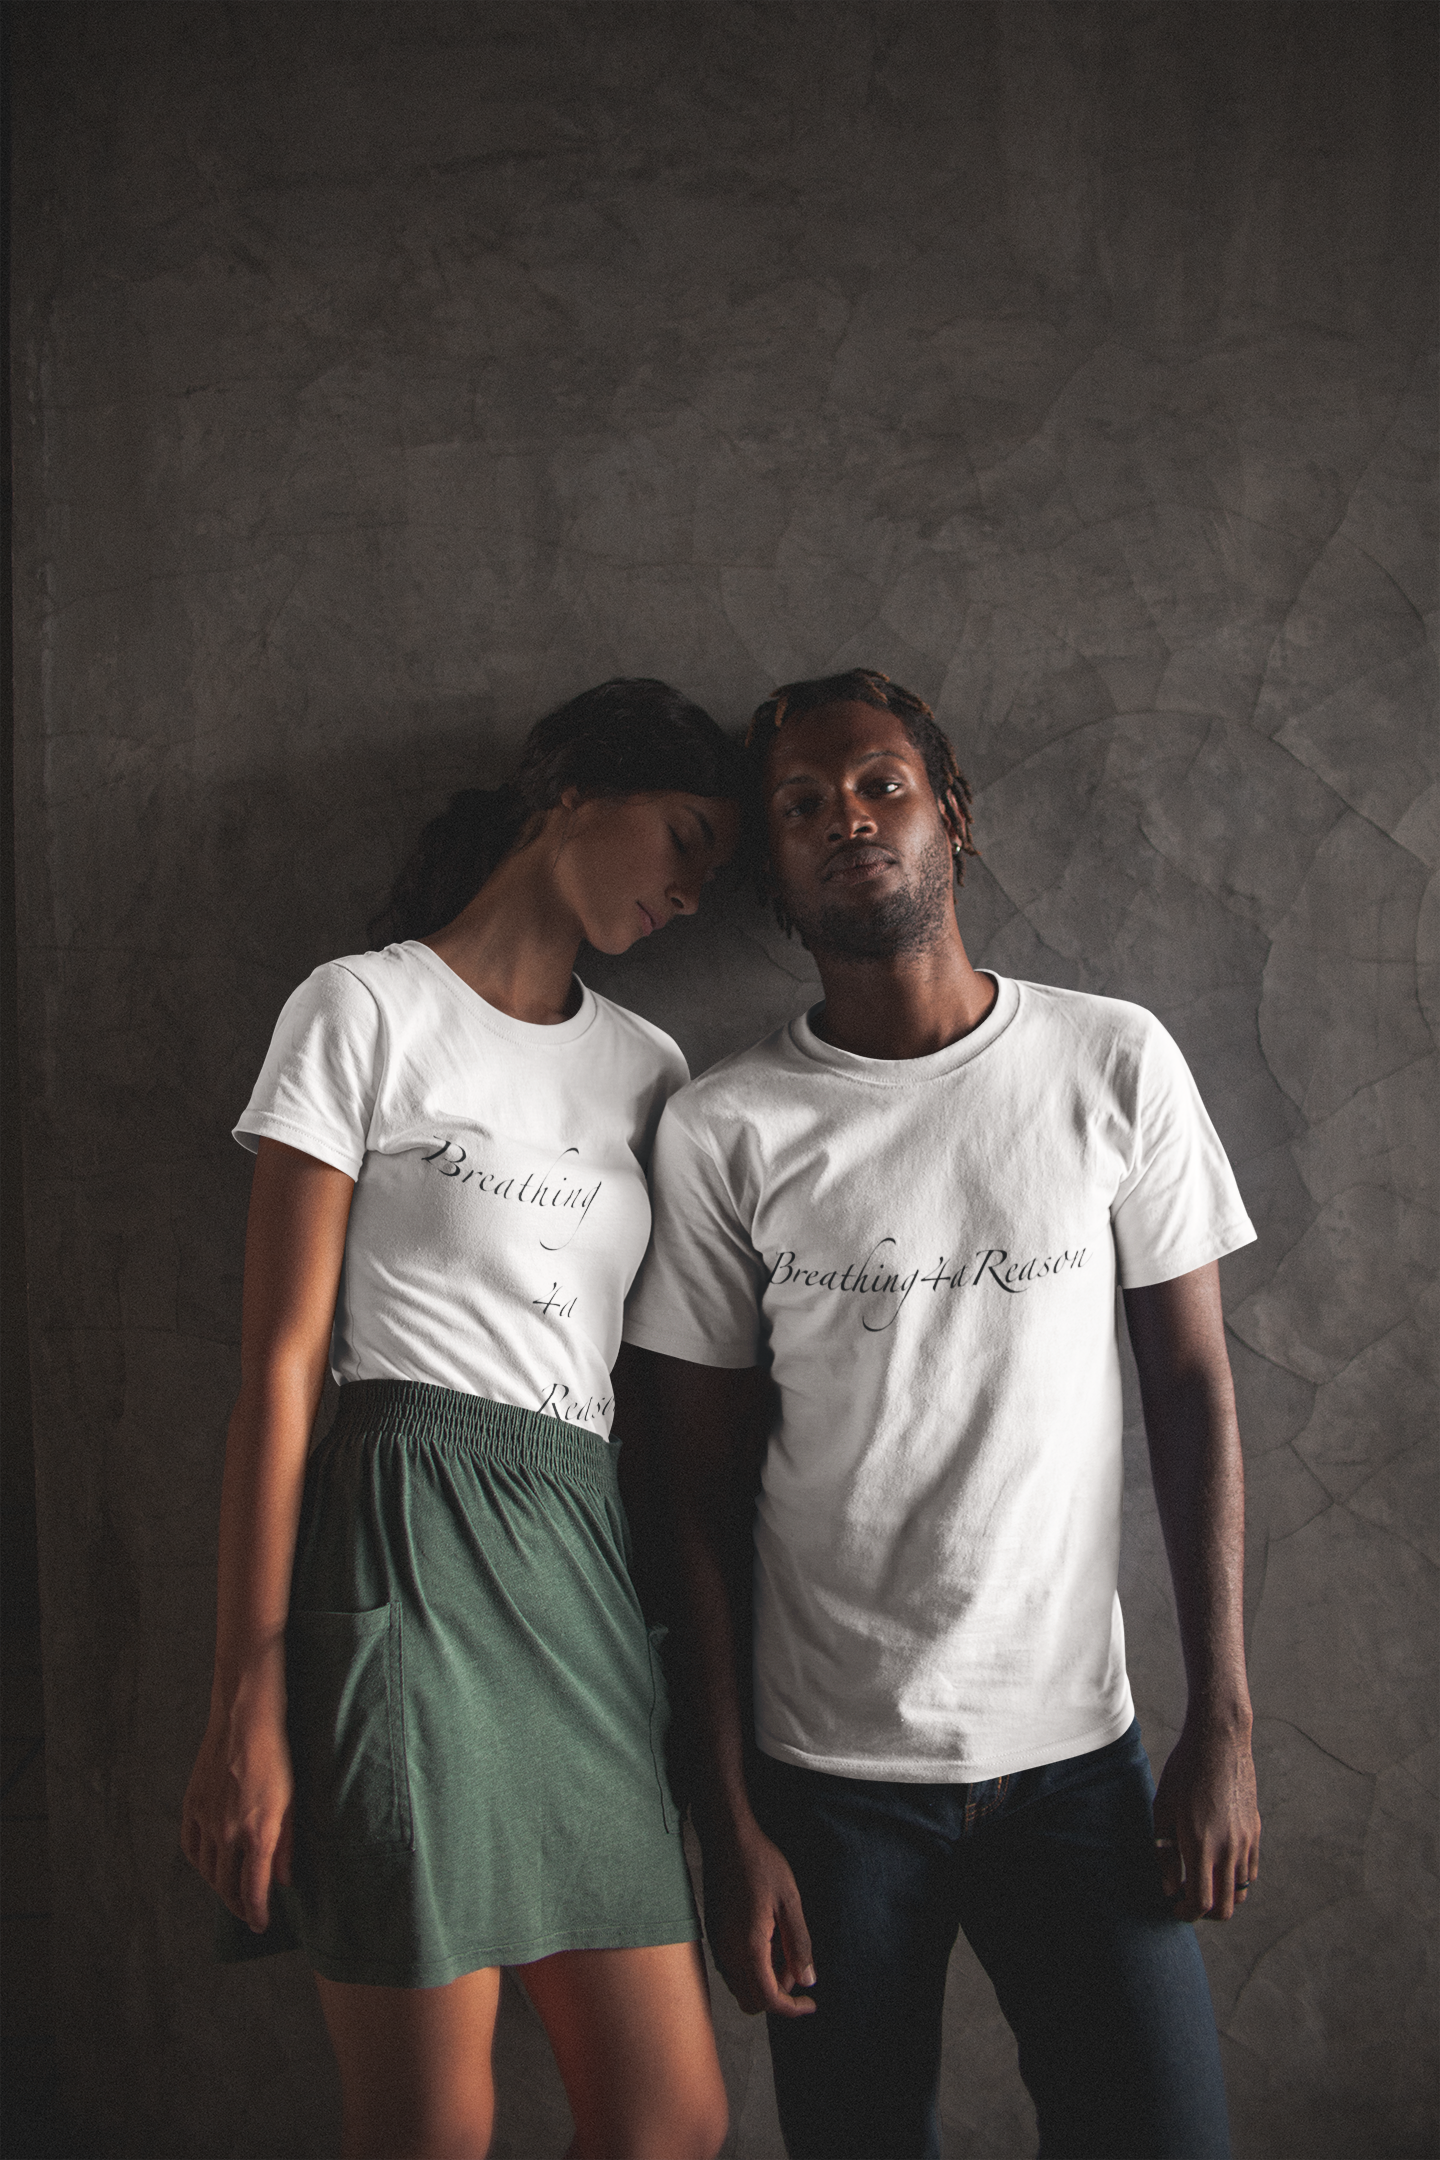 Breathing4aReason Unisex Tees, Scripted Writing Across Center